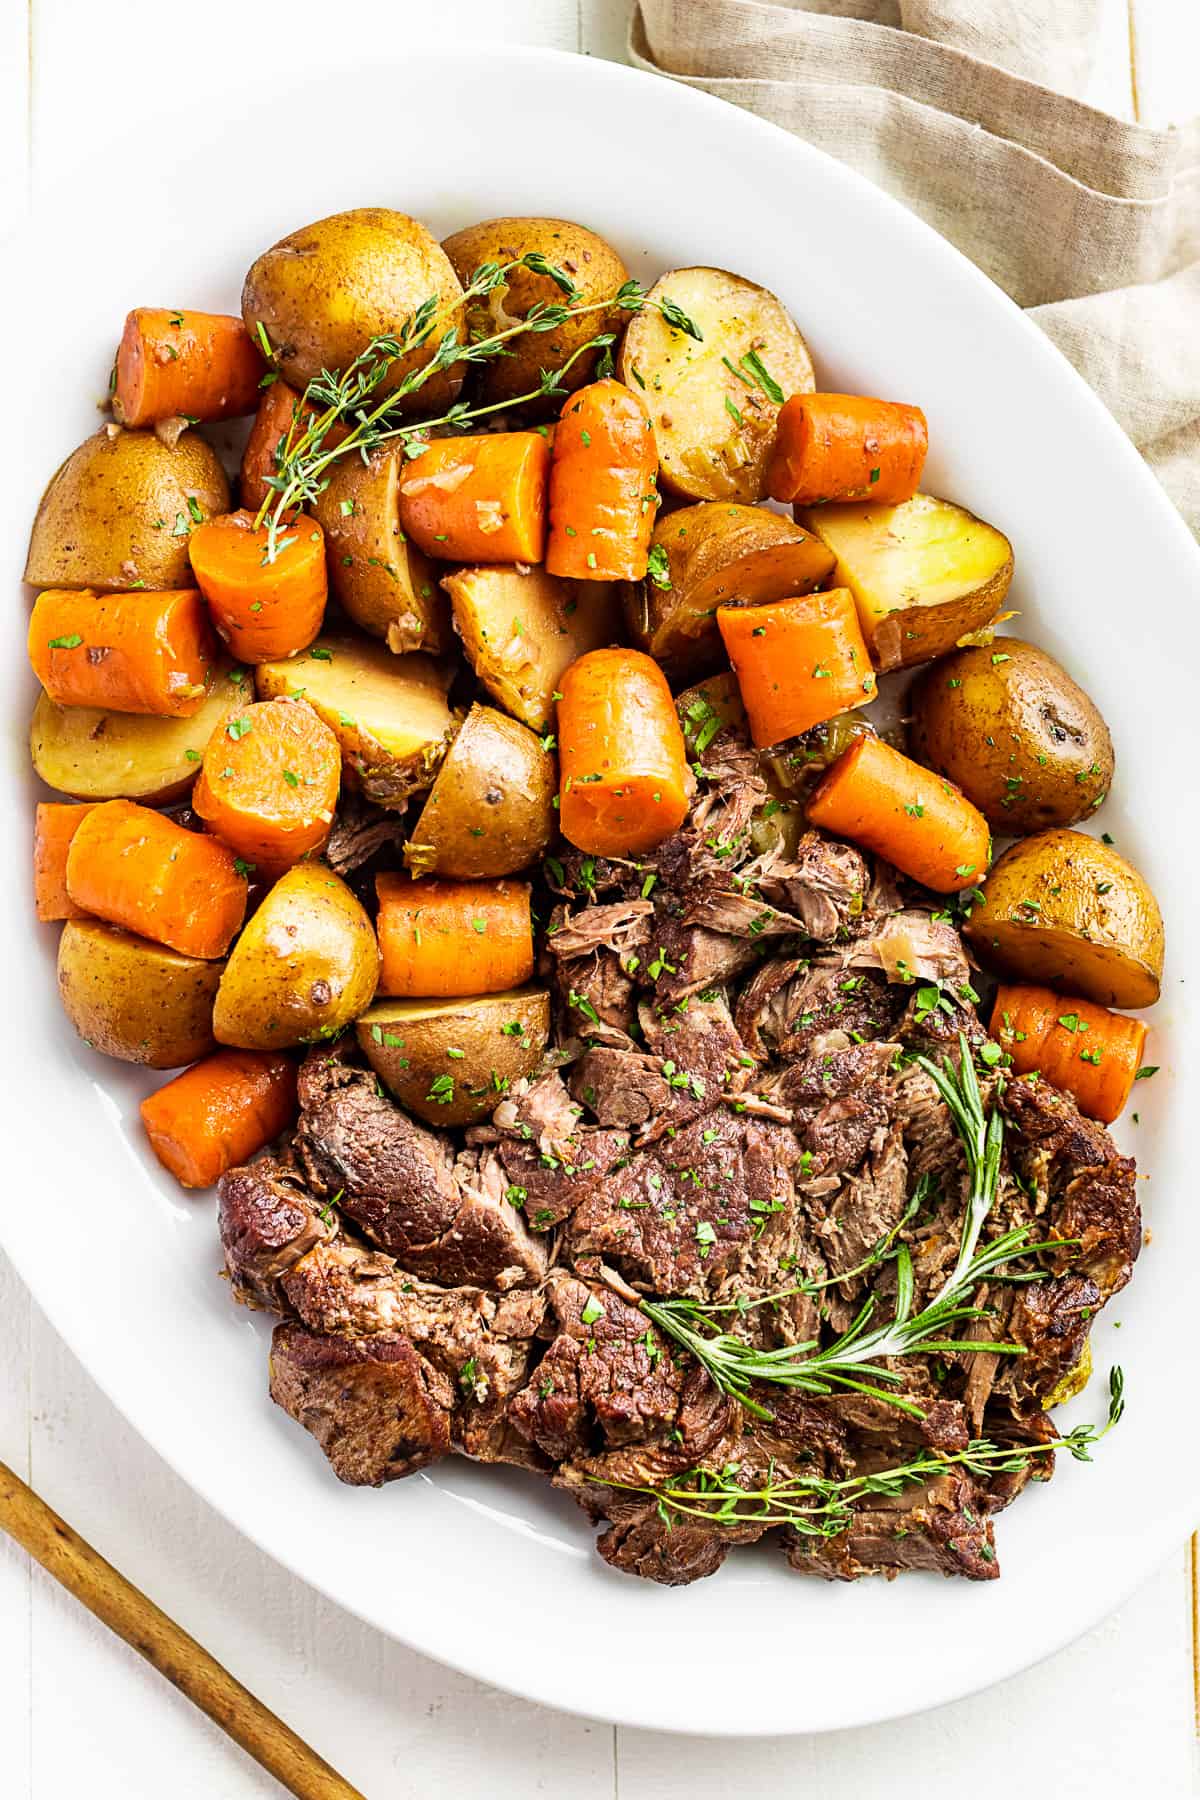 The Slow Cooker Pot Roast arranged on a large white plater.